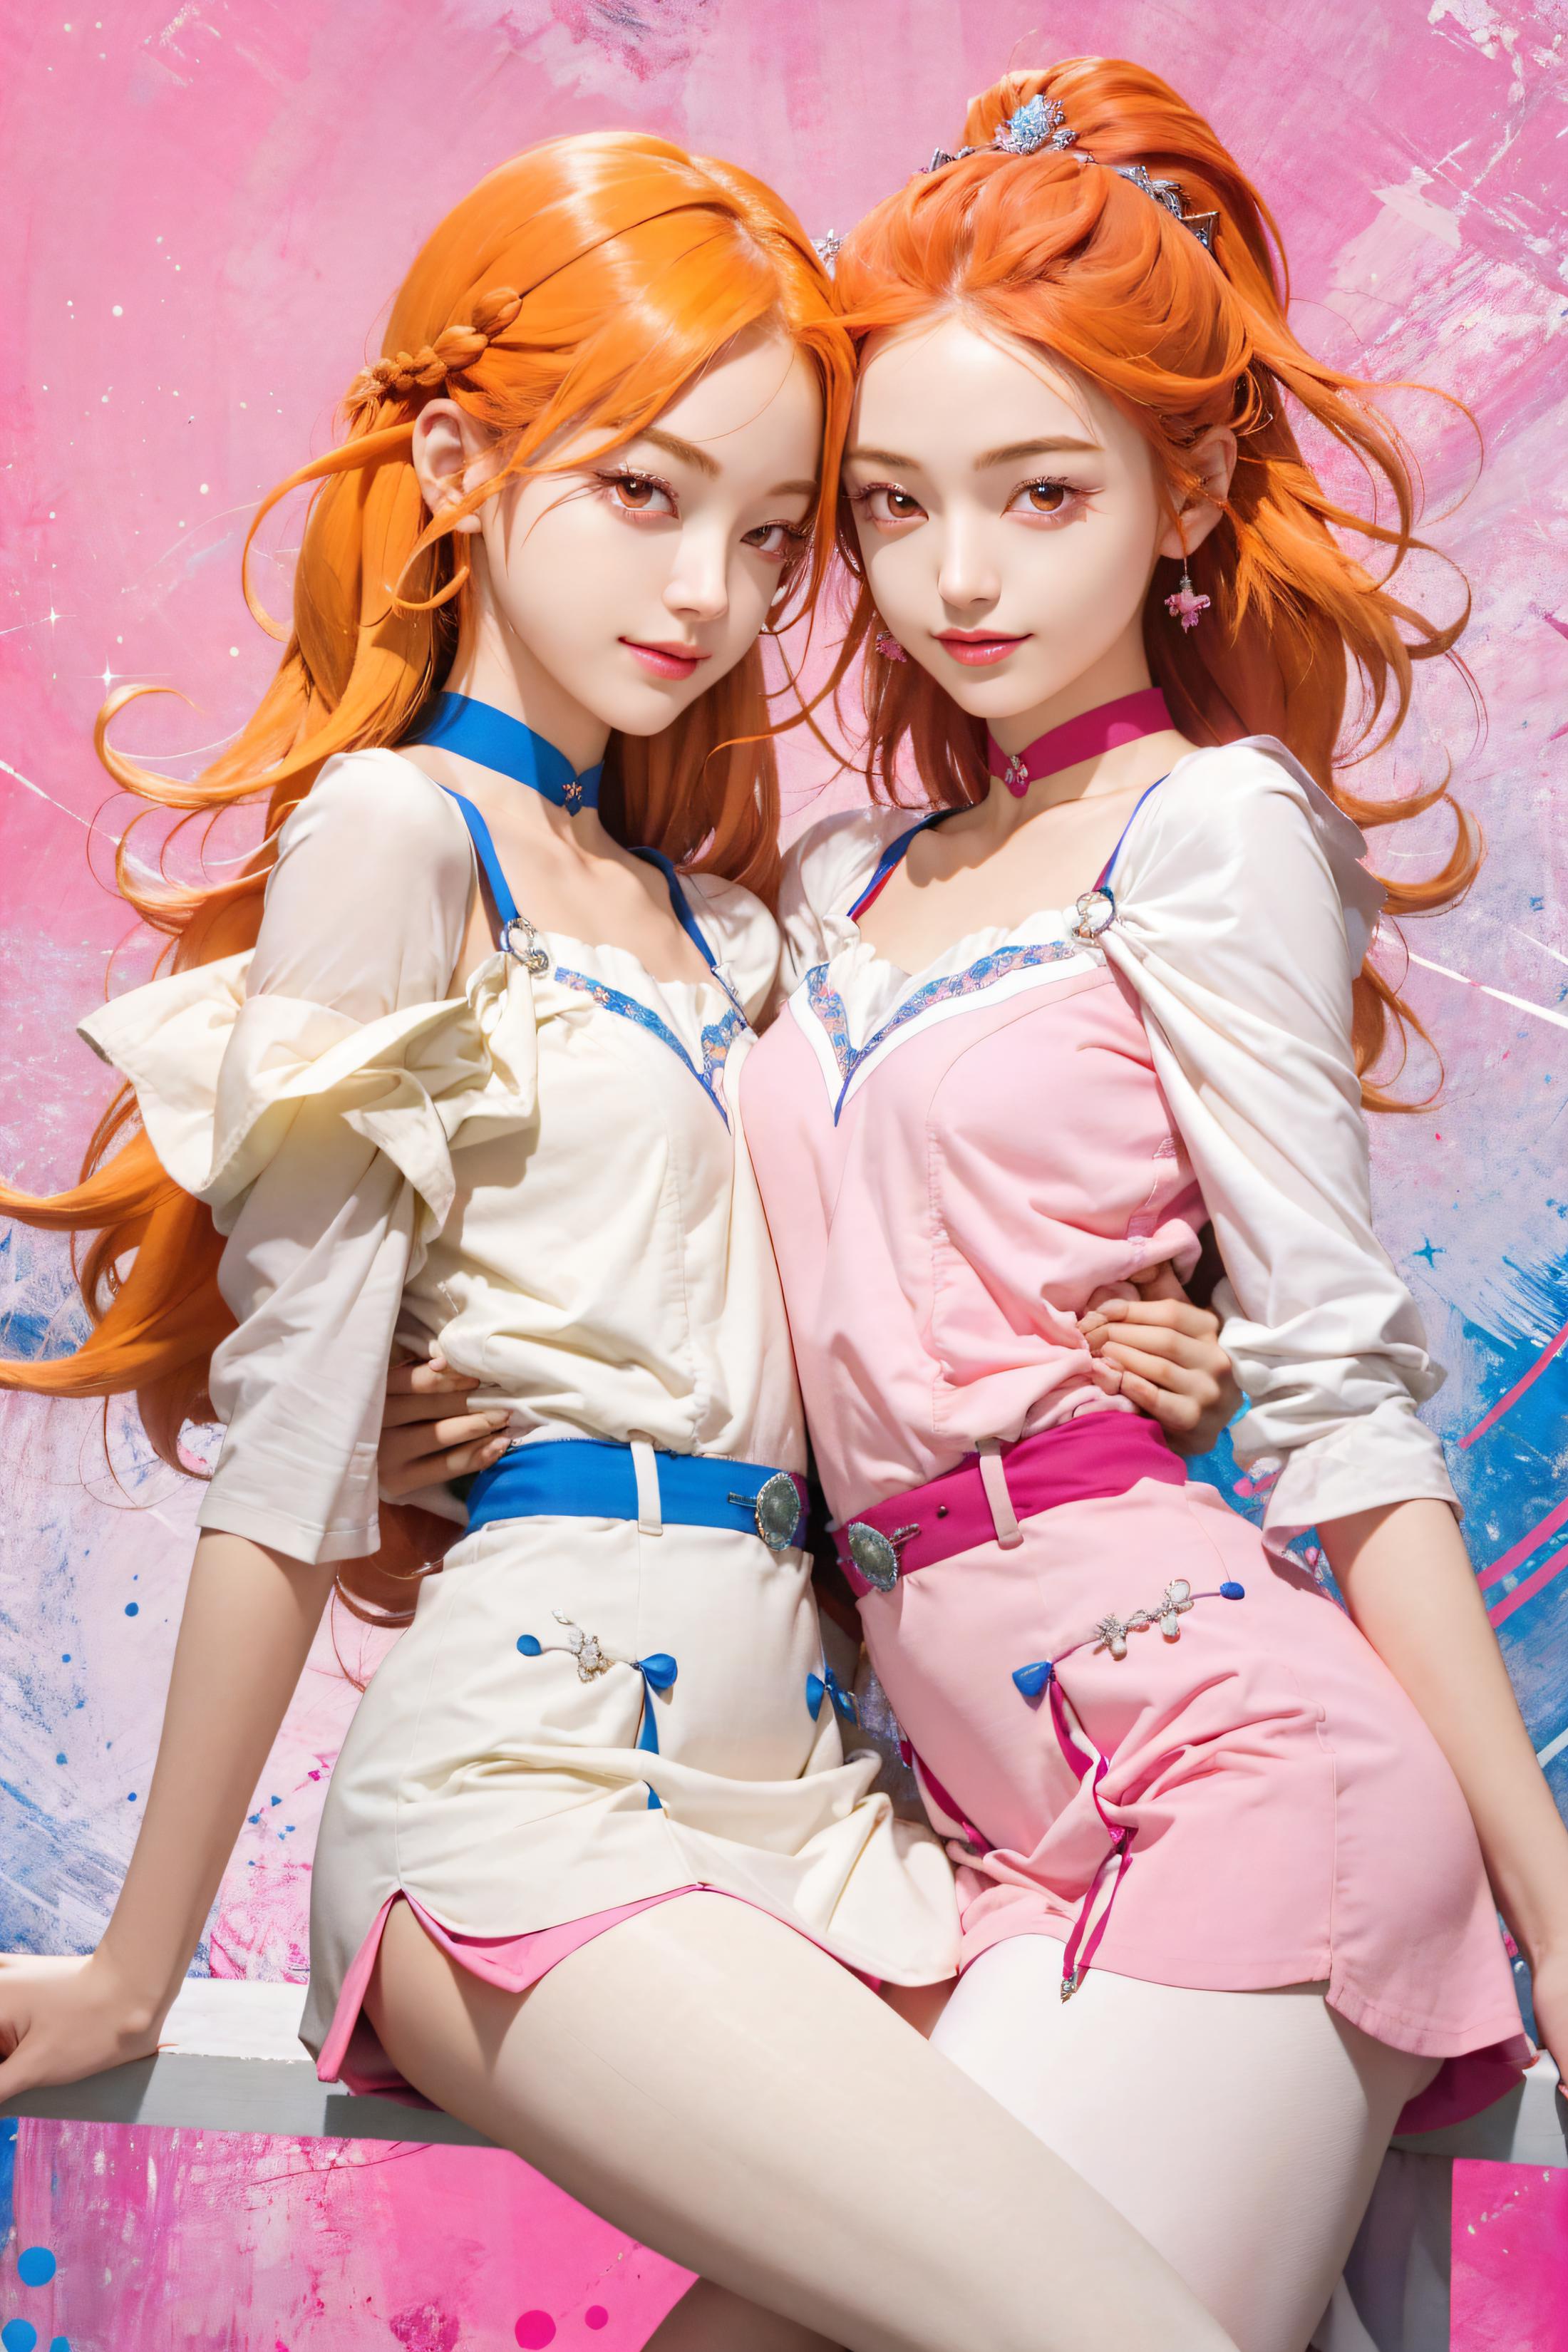 Two pretty girls pose together with their arms around each other.